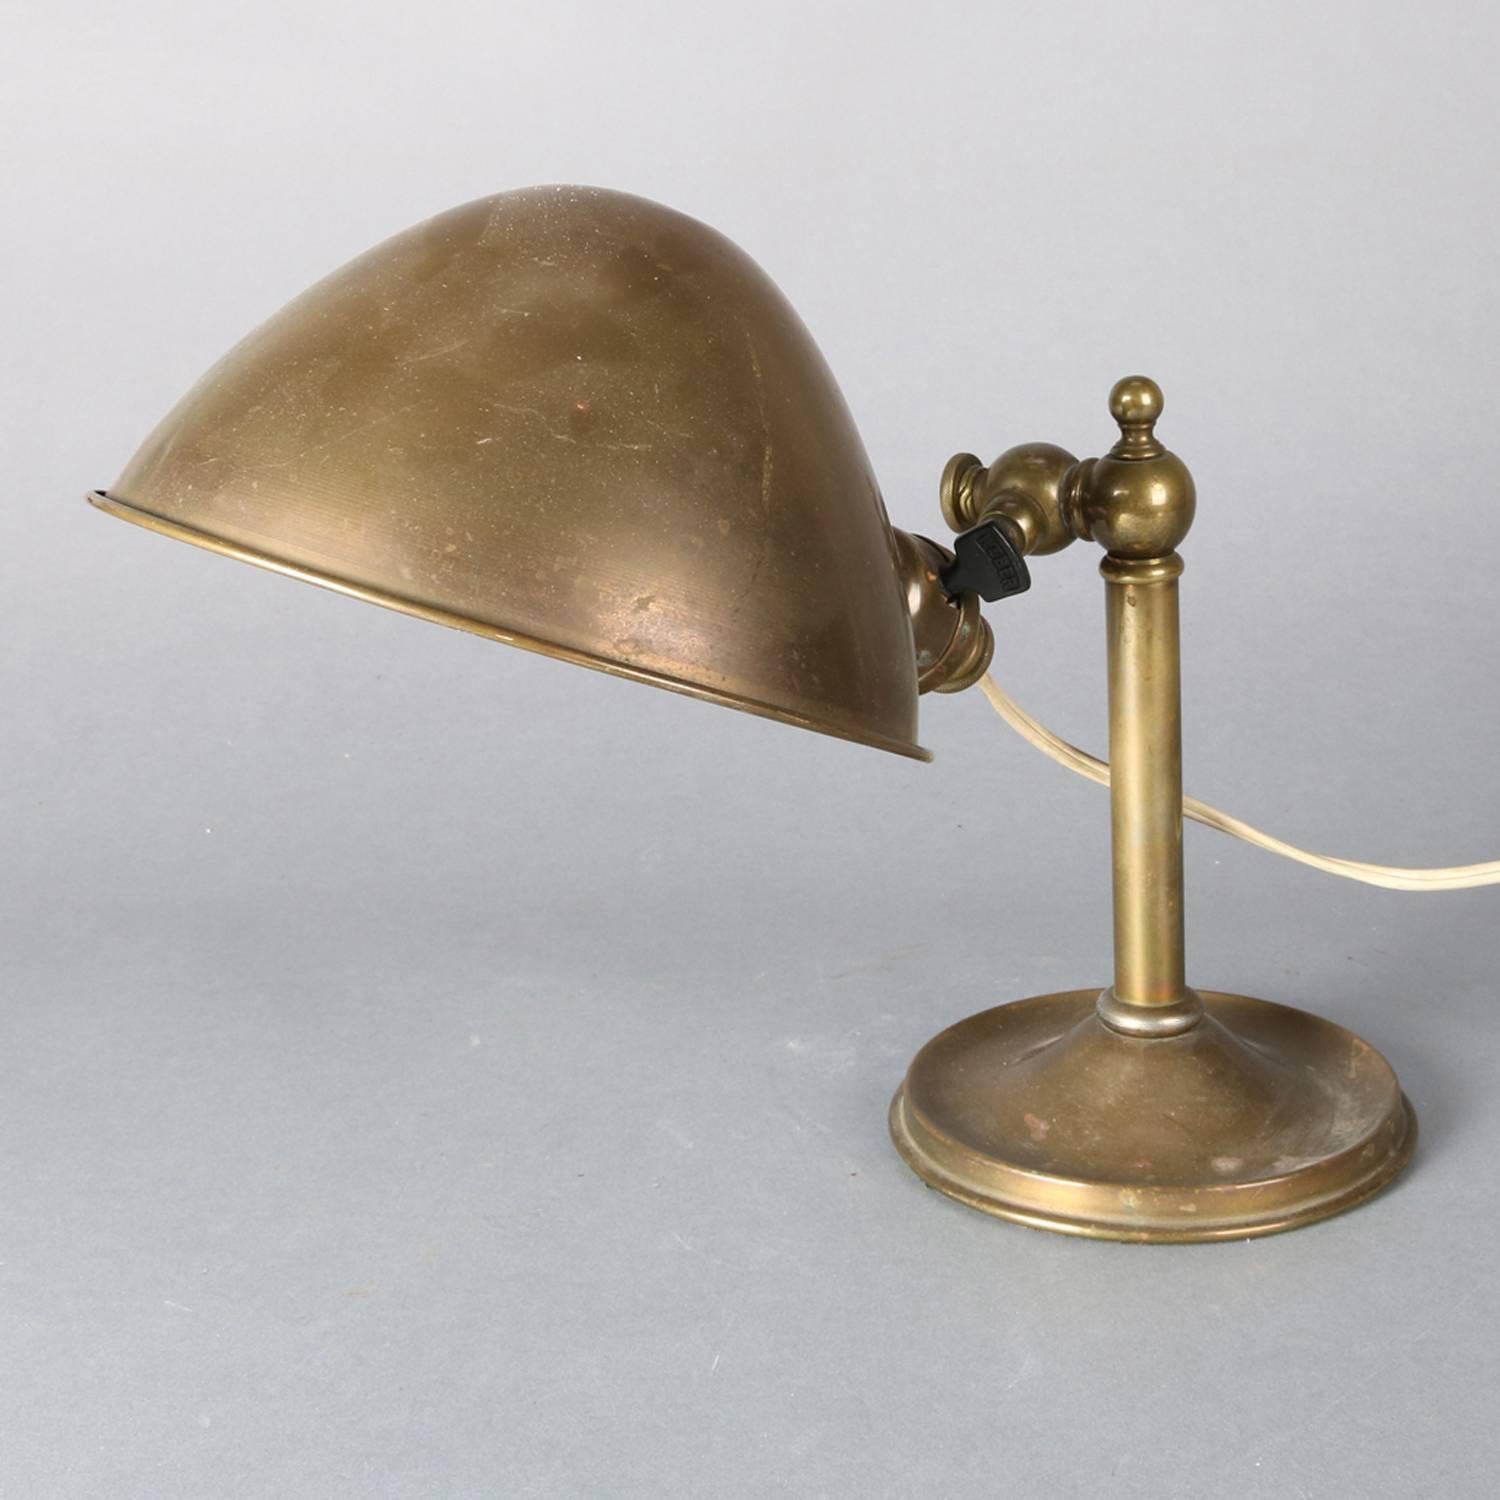 Antique brass gilt Bradley & Hubbard School desk lamp features industrial form with adjustable arm and dome shade, circa 1910

Measures: 11